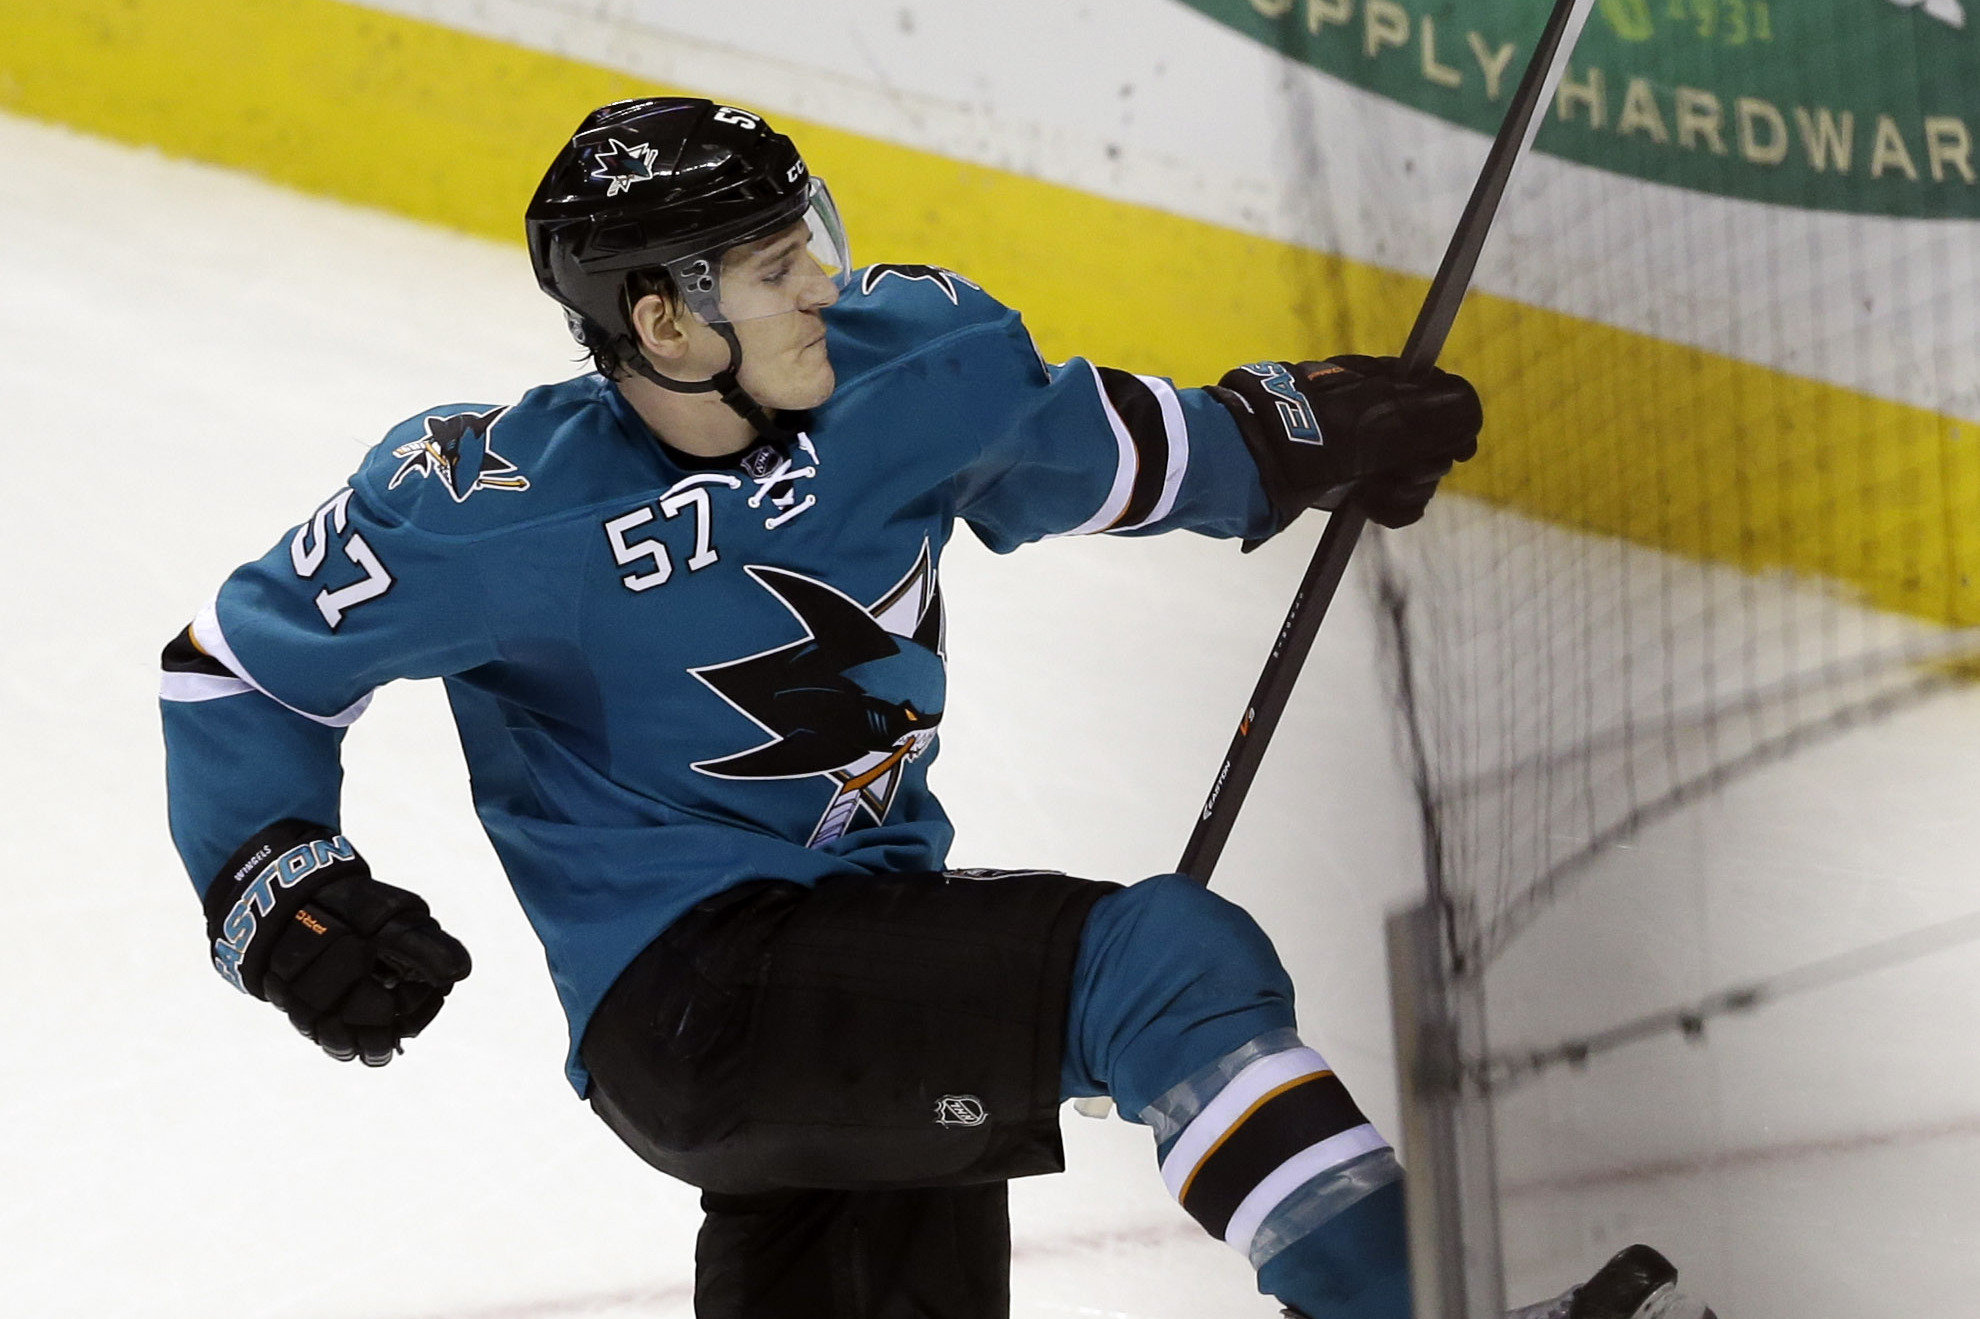 San Jose Sharks Partner With Hookit To Prove Value For World-Class